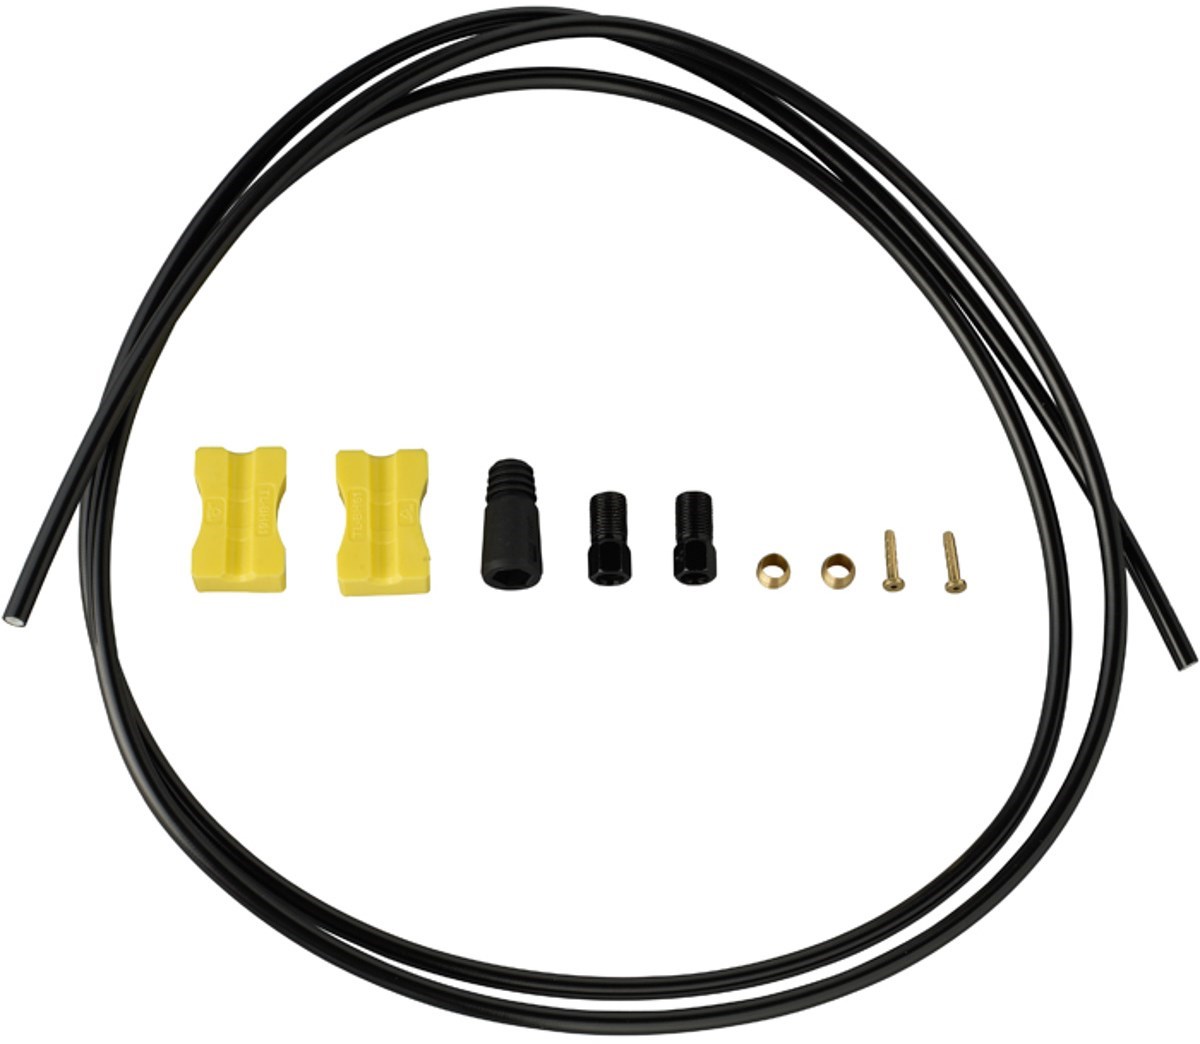 Shimano SMBH59 M525/ 535 Deore Disc Brake Cuttable Hose product image